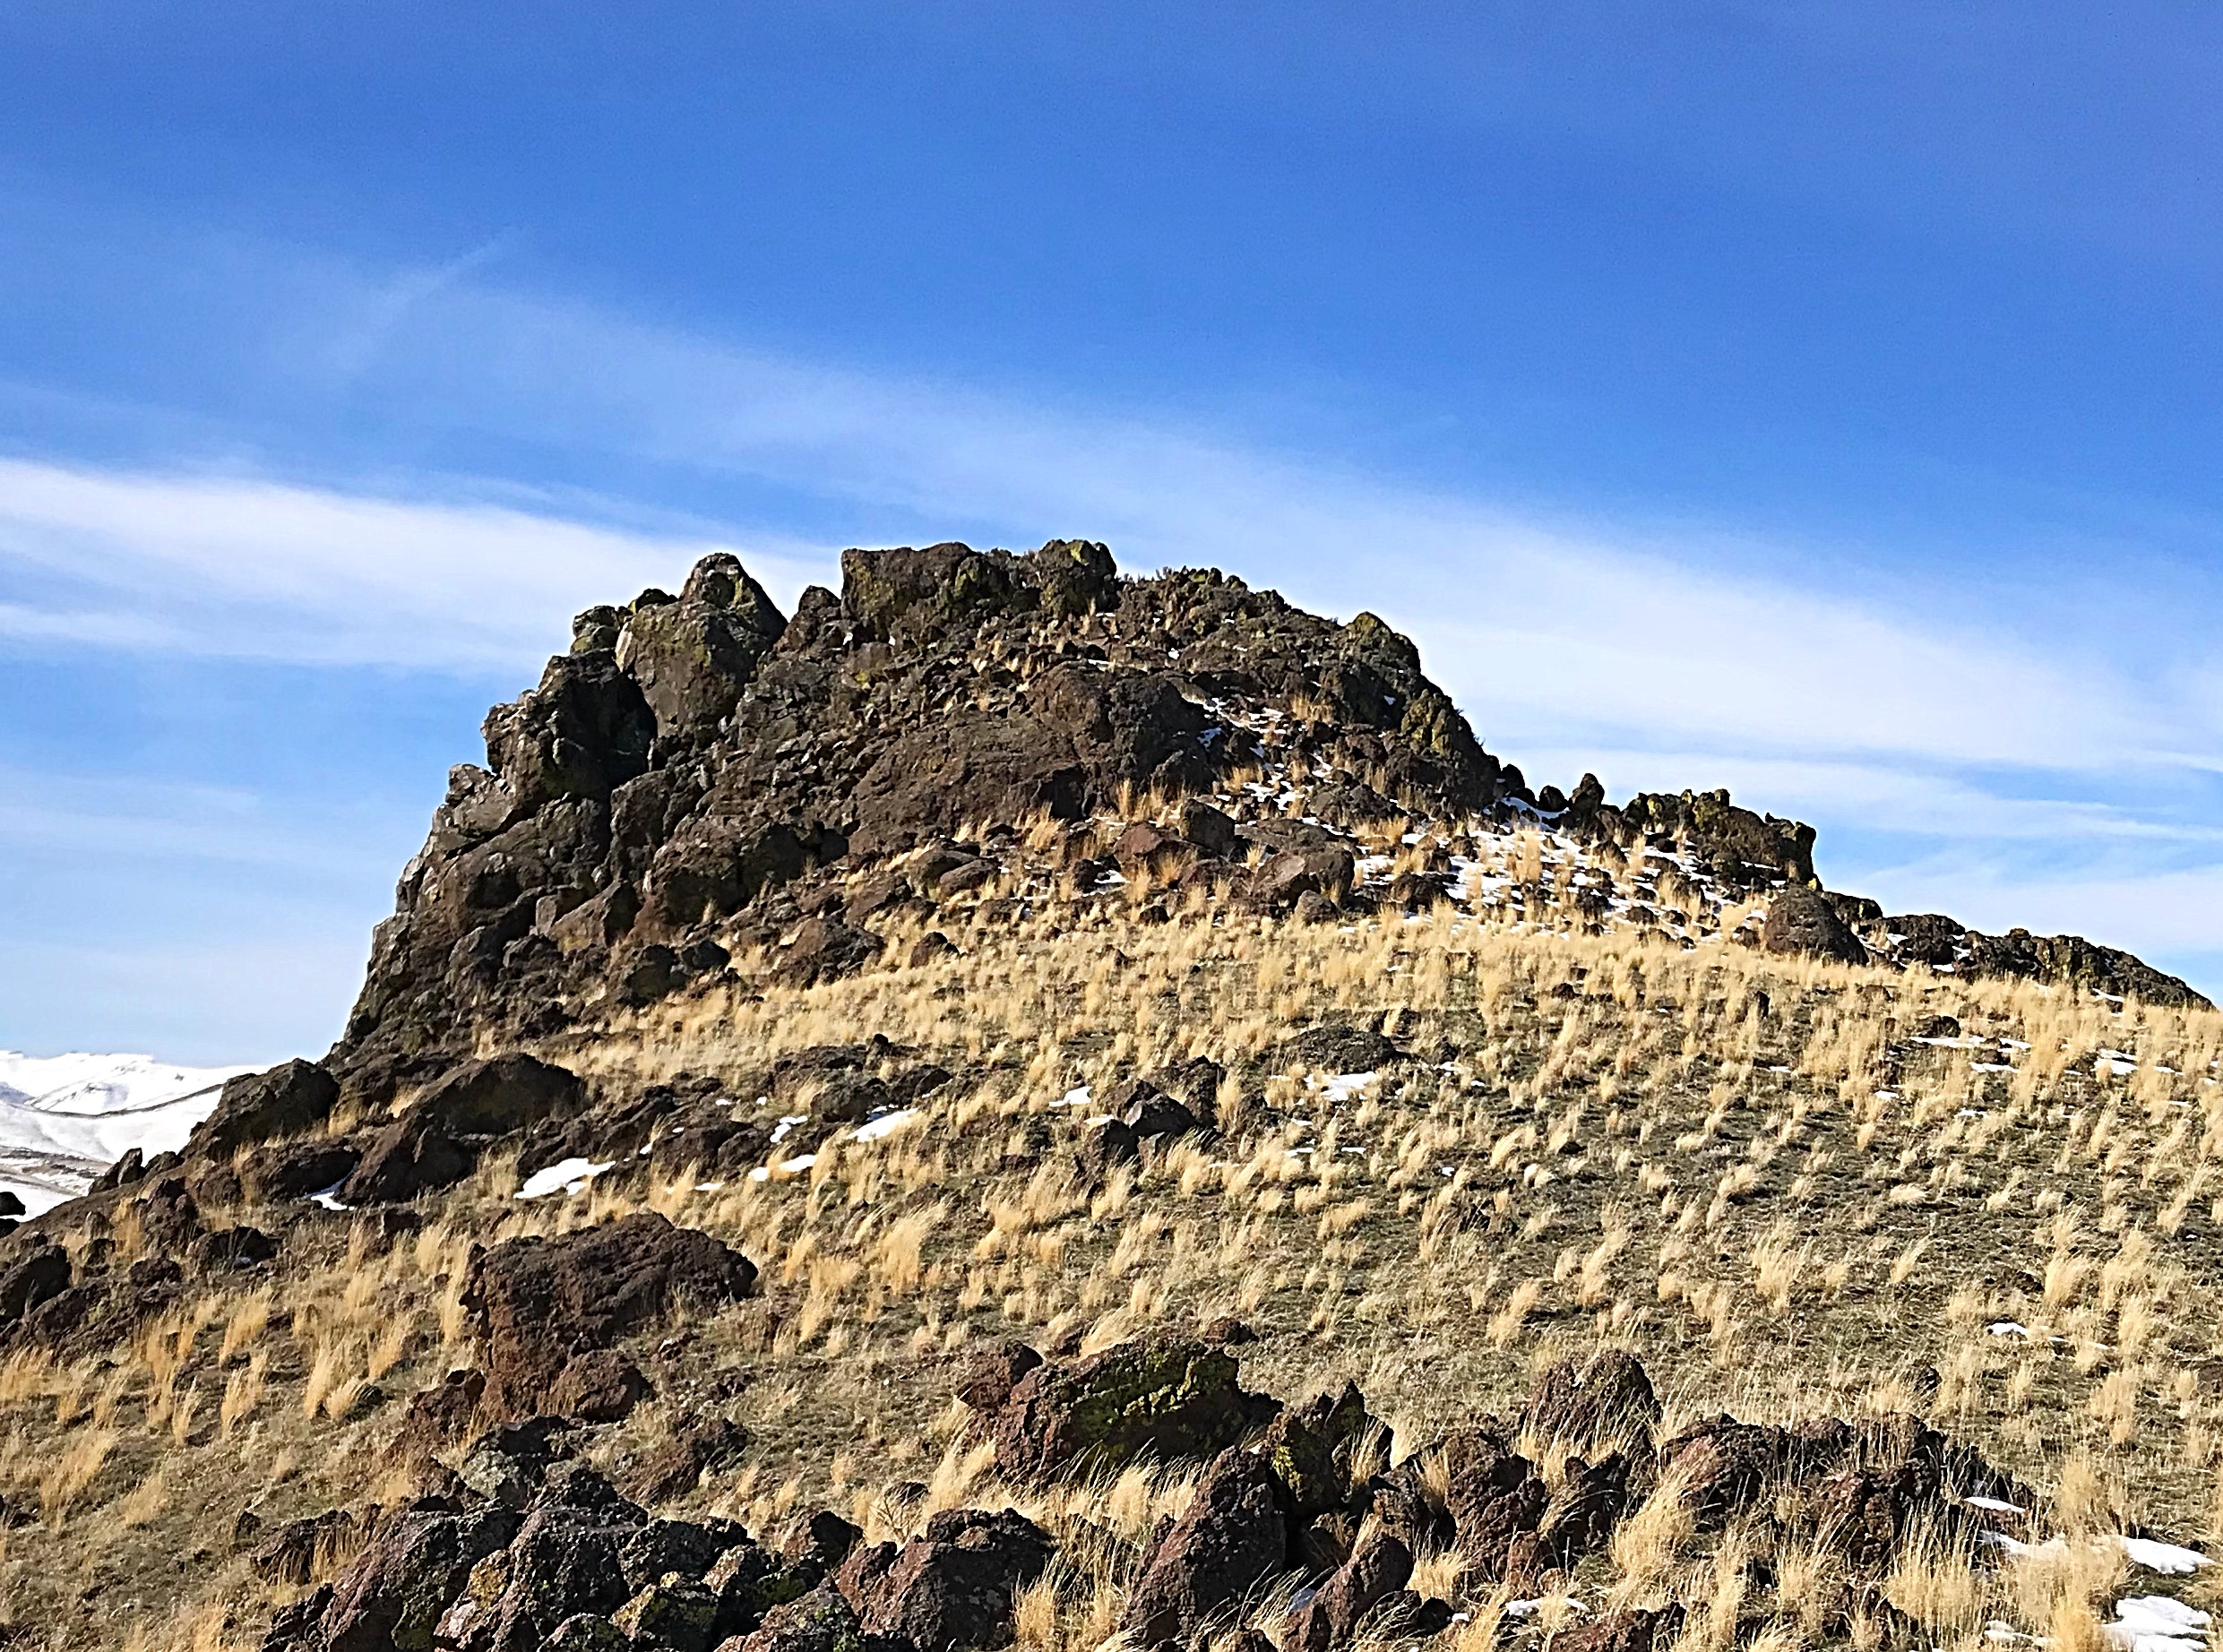 The summit block viewed from the north.